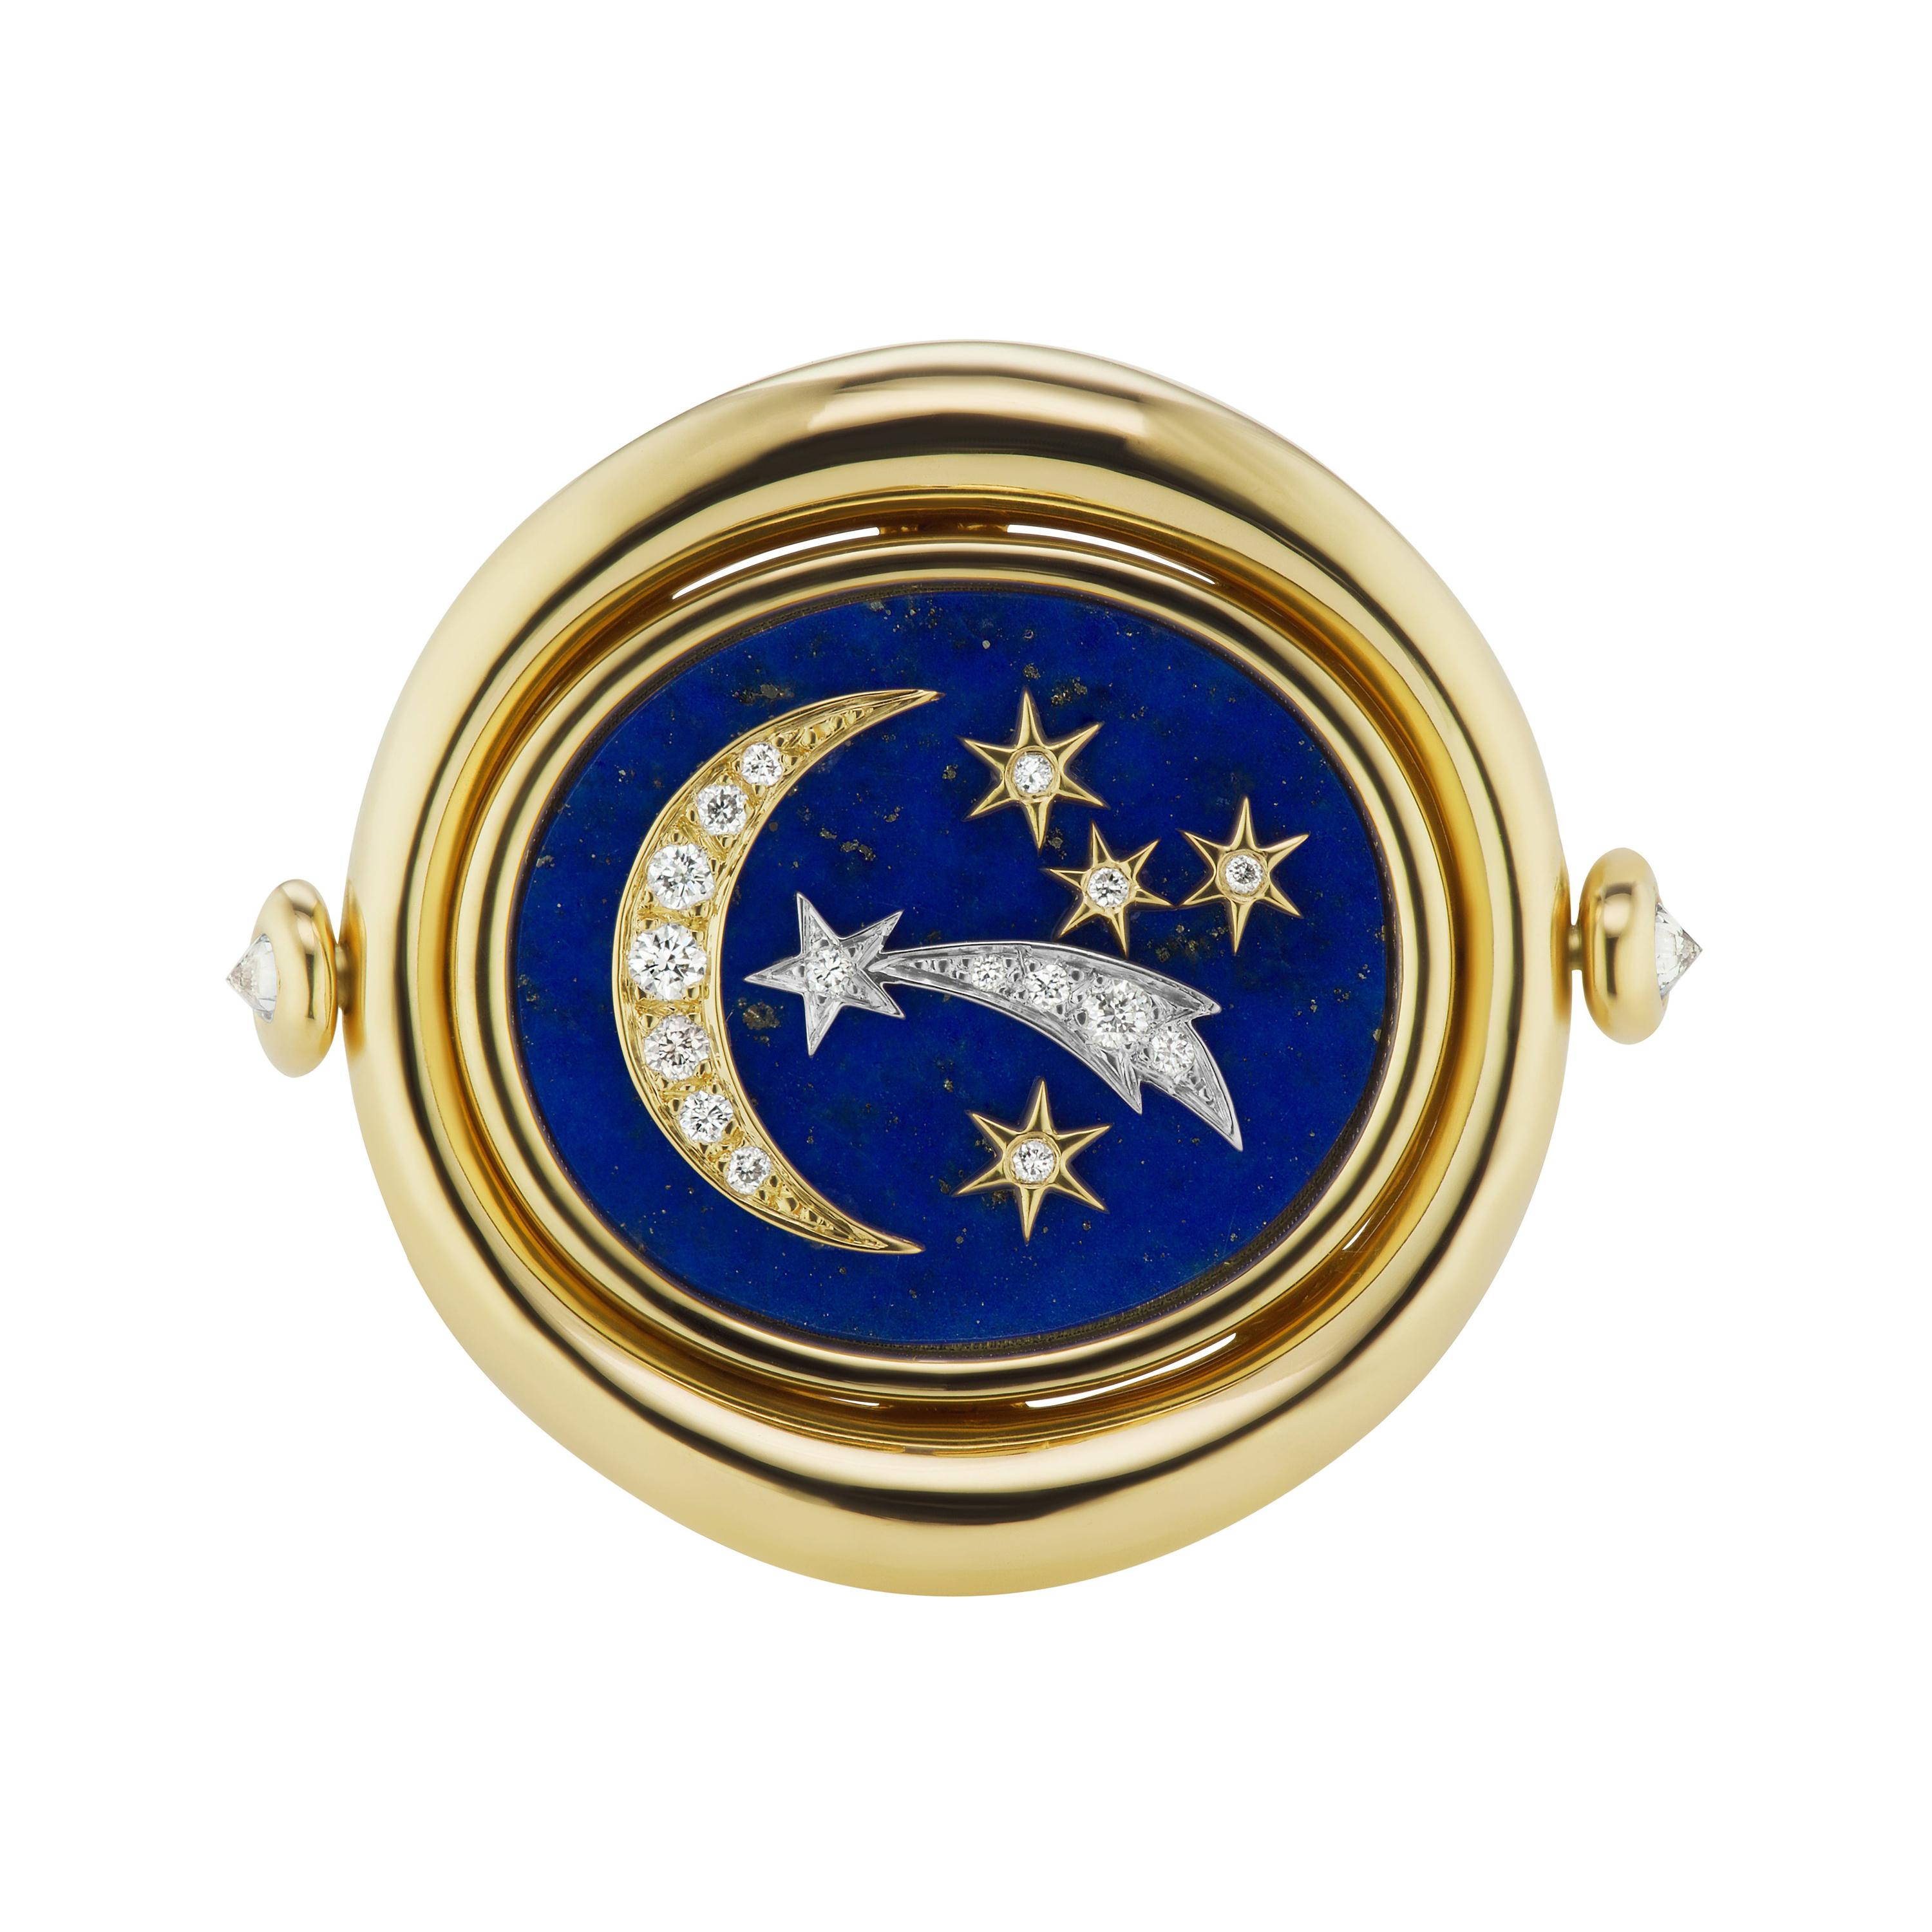 AnaKatarina "Air" Flip Ring/Pendant in Lapis, Diamonds, White and Yellow Gold For Sale